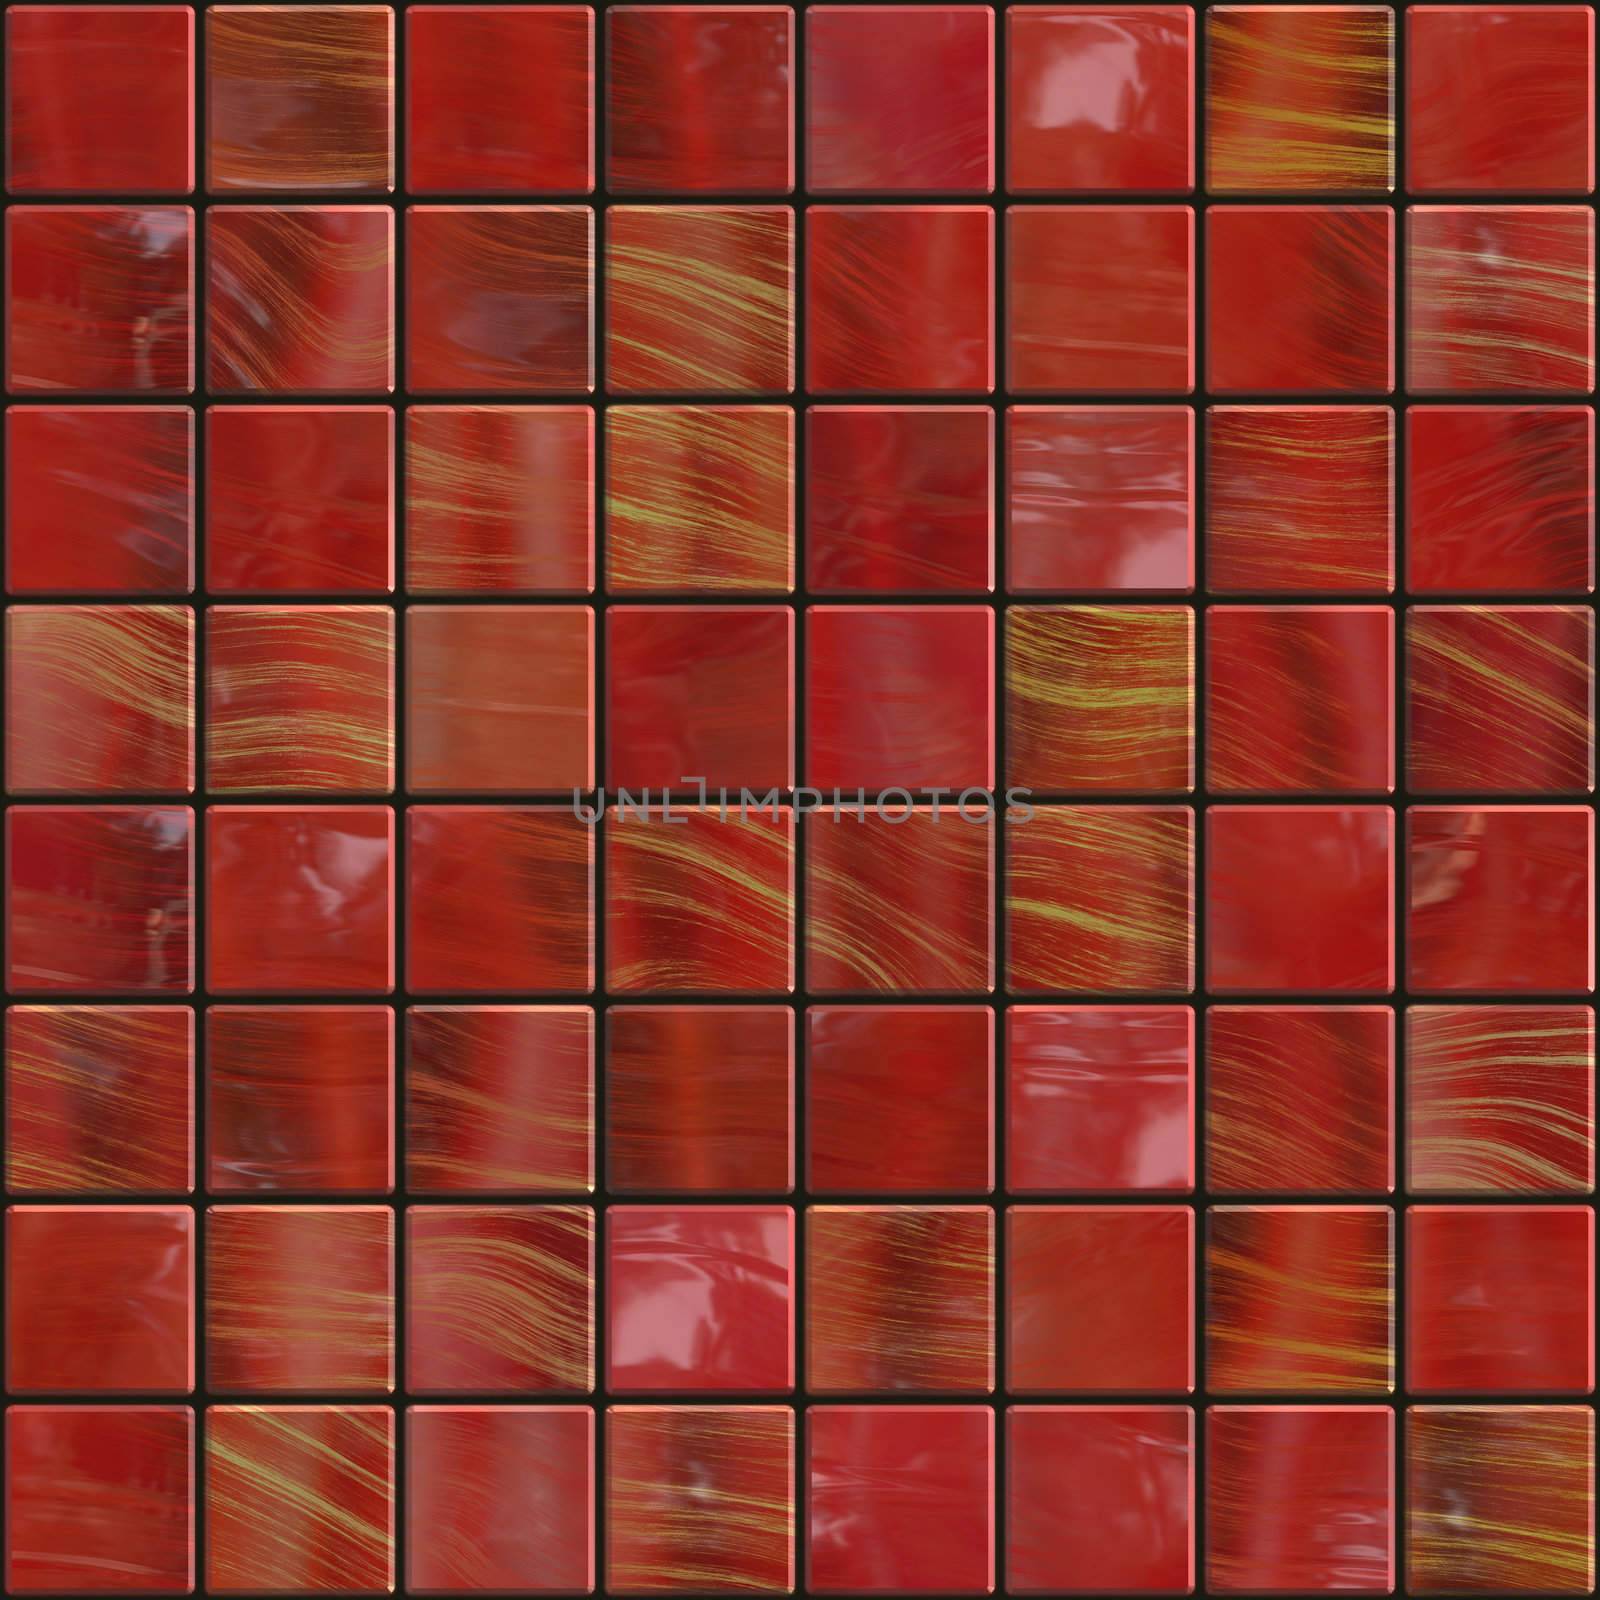 red ceramic tiles with golden sparkles, will tile seamless as a pattern